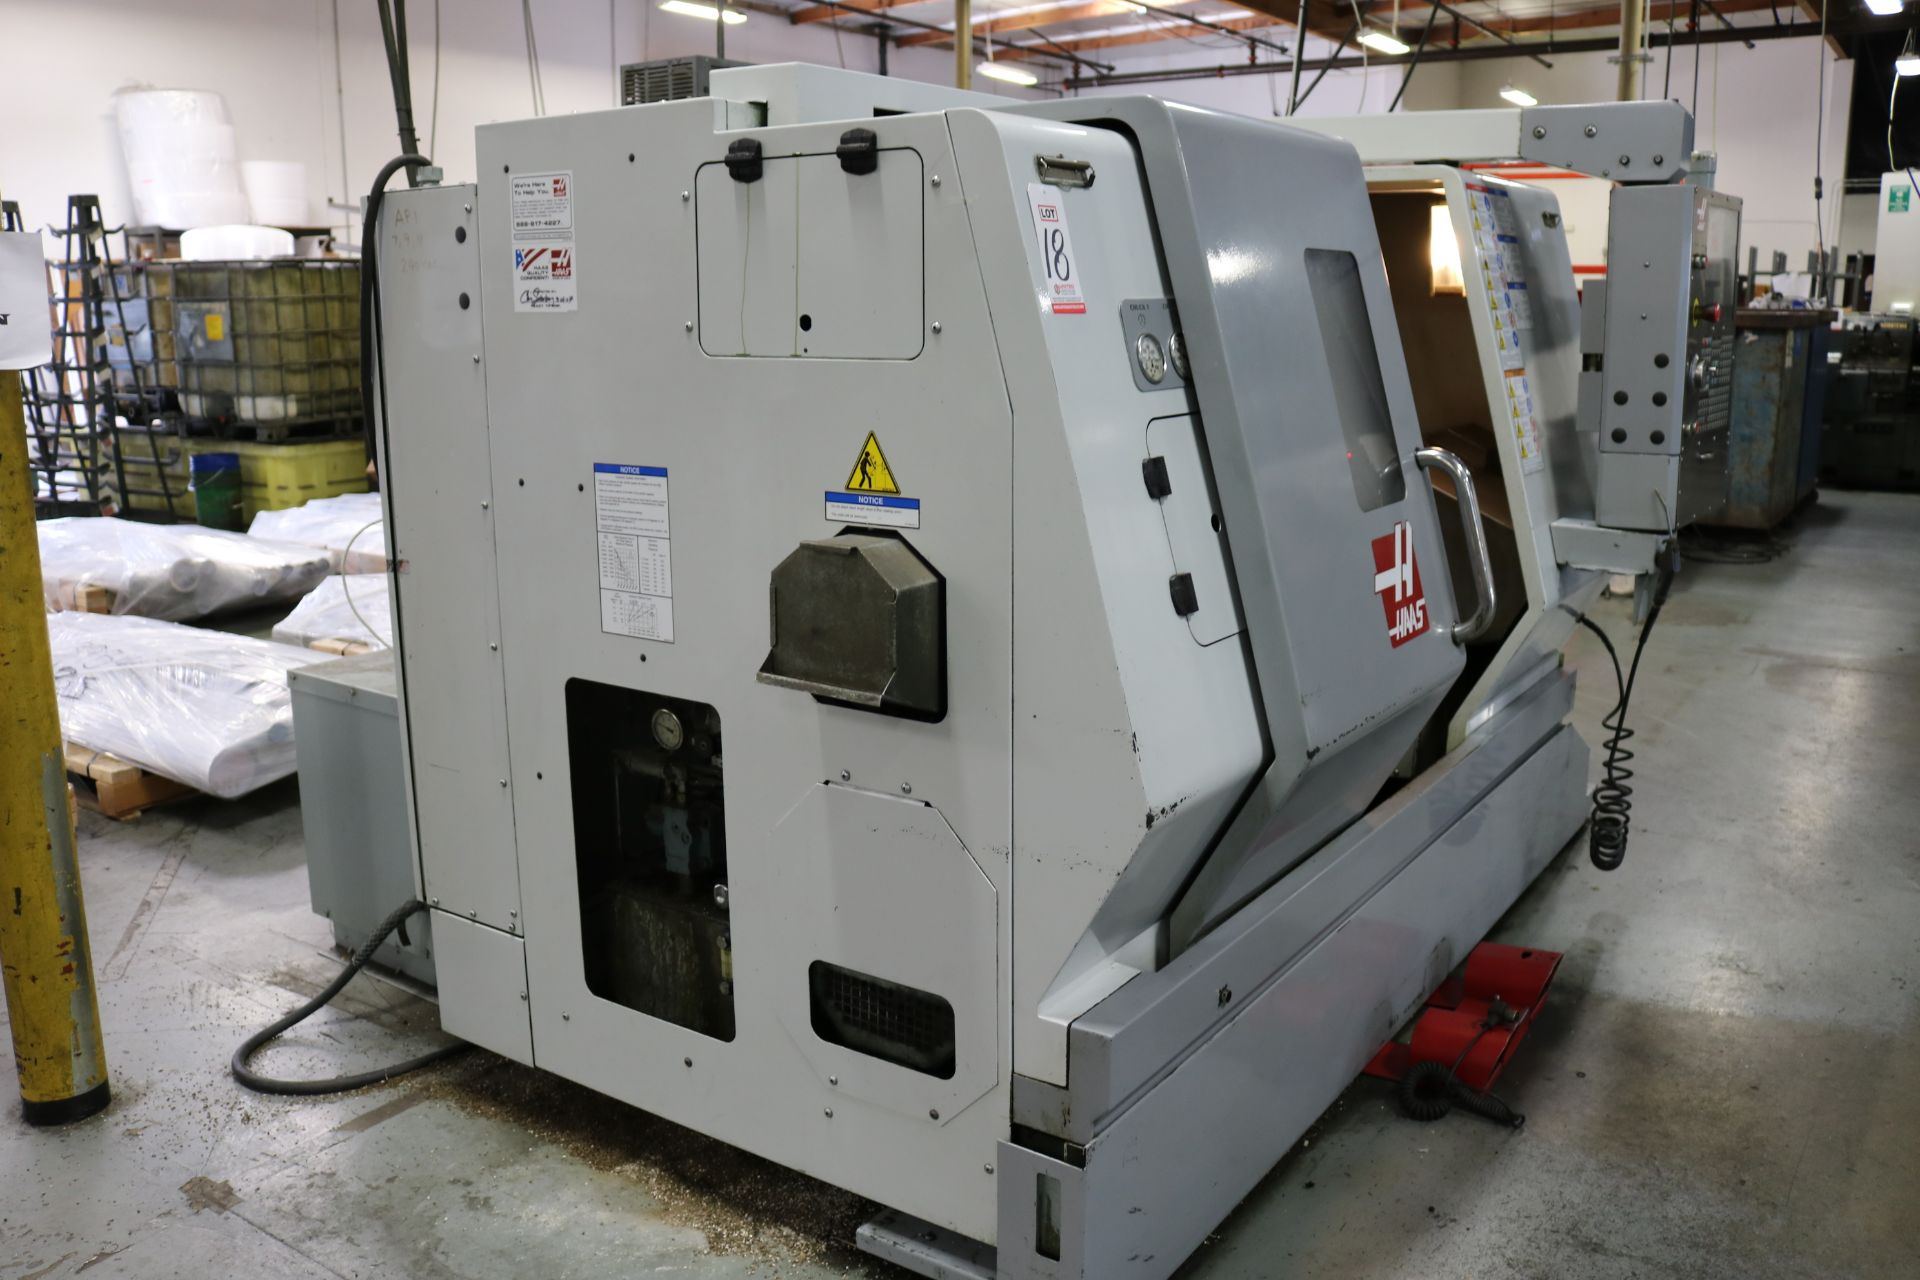 2007 HAAS TL-15 CNC TURNING CENTER, 8" 3 JAW CHUCK 23" SWING, 9.5" SWING OVER CROSS SLIDE, 2" BAR - Image 8 of 11